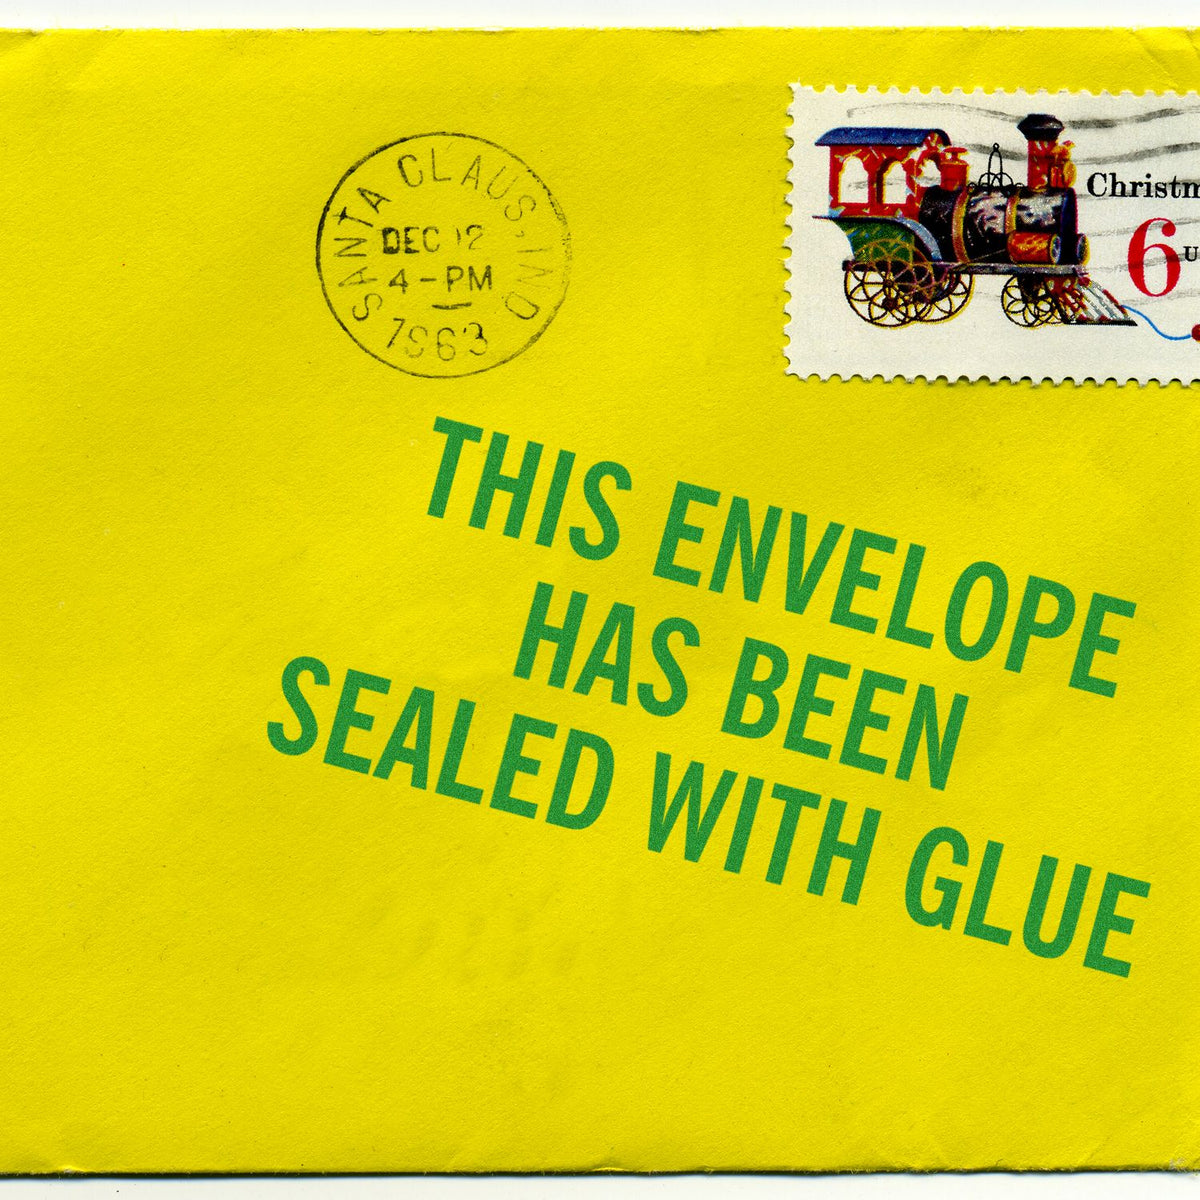 This Envelope Has Been Sealed Rubber Stamp In Use